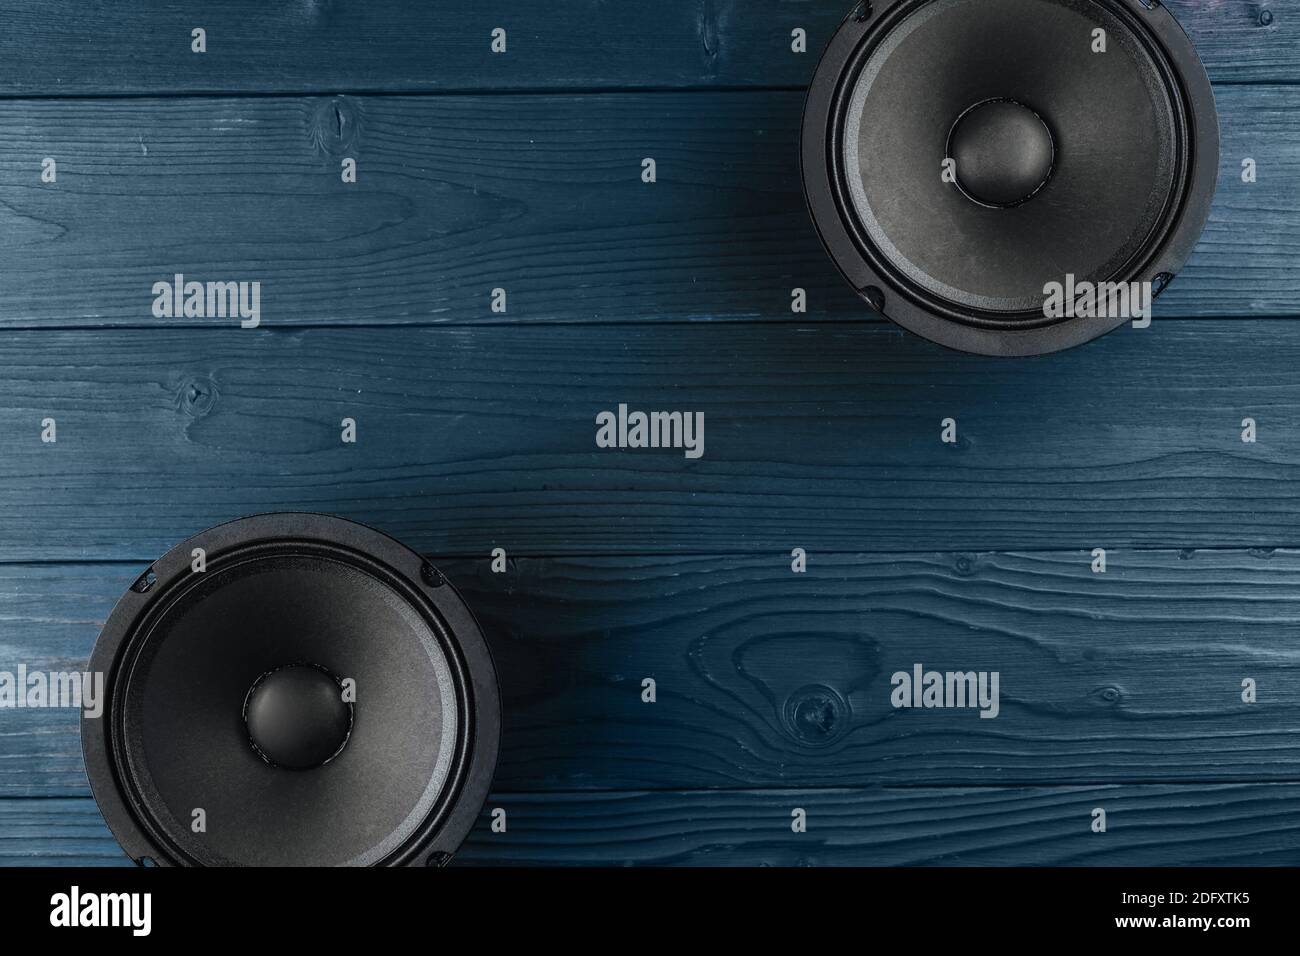 Car audio, black car speakers lie on a blue wooden background. Stock Photo